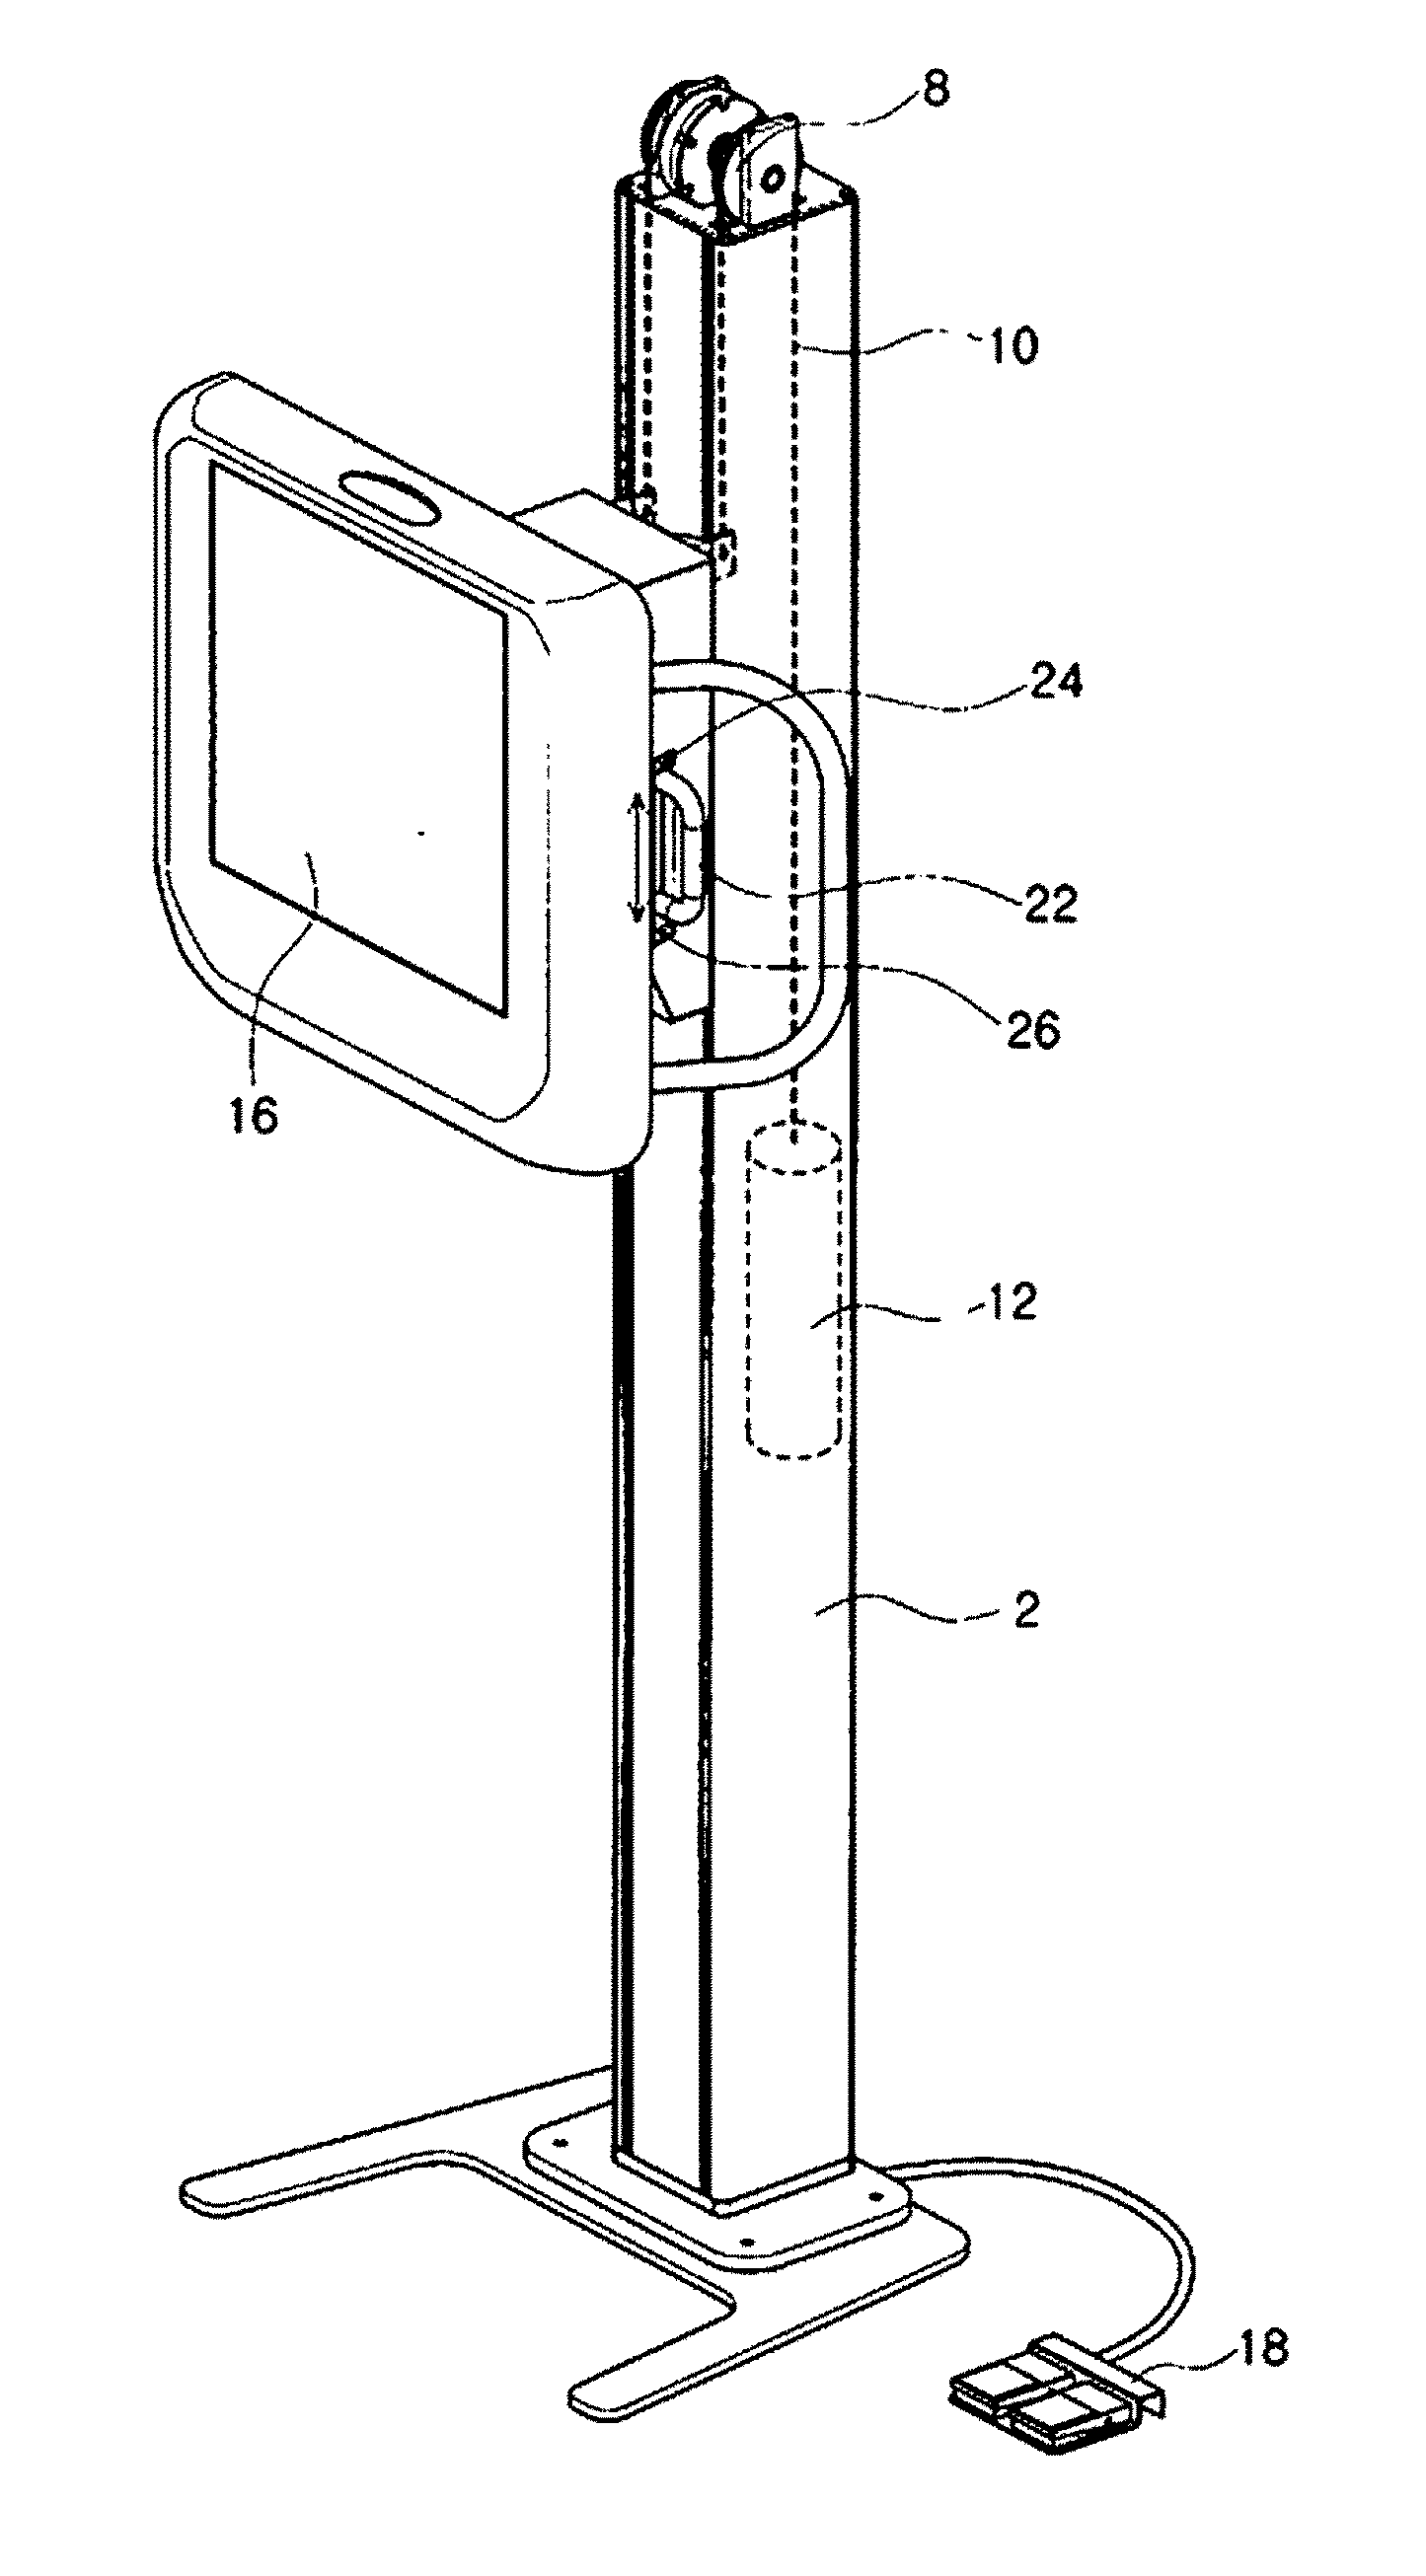 X-ray photography device capable of photographing in various photography modes